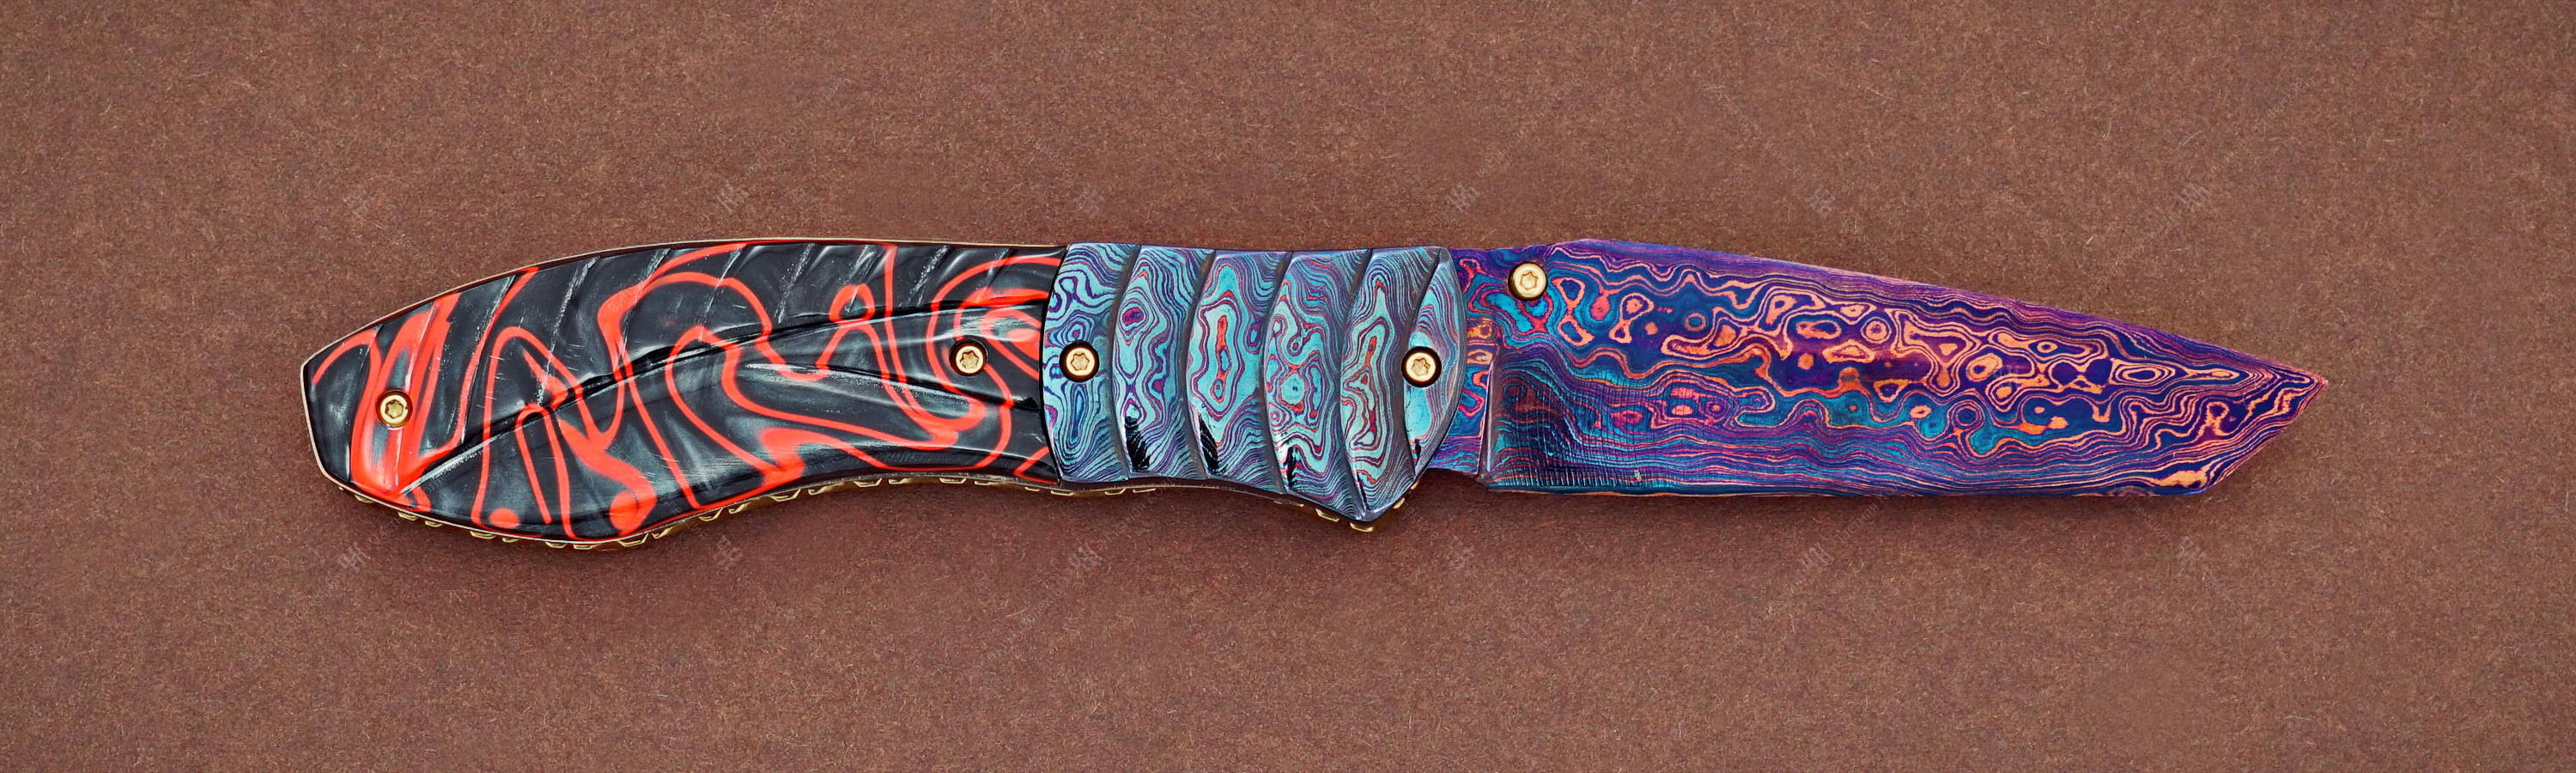 collectible damascus knife